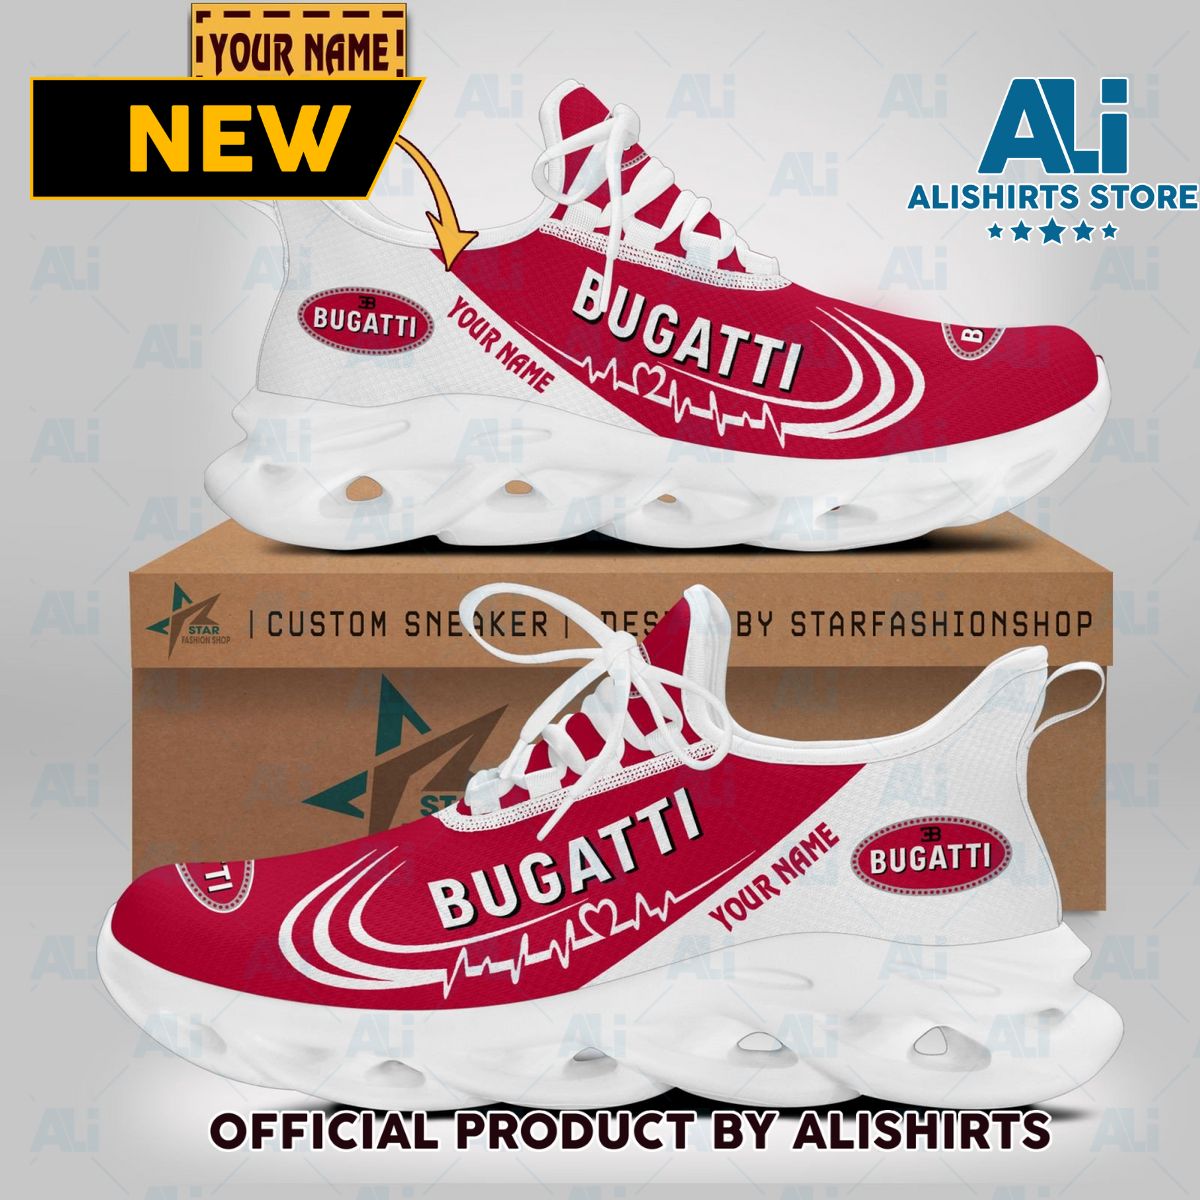 Bugati Car Brand Lover Clunky Sneaker Max Soul Shoes